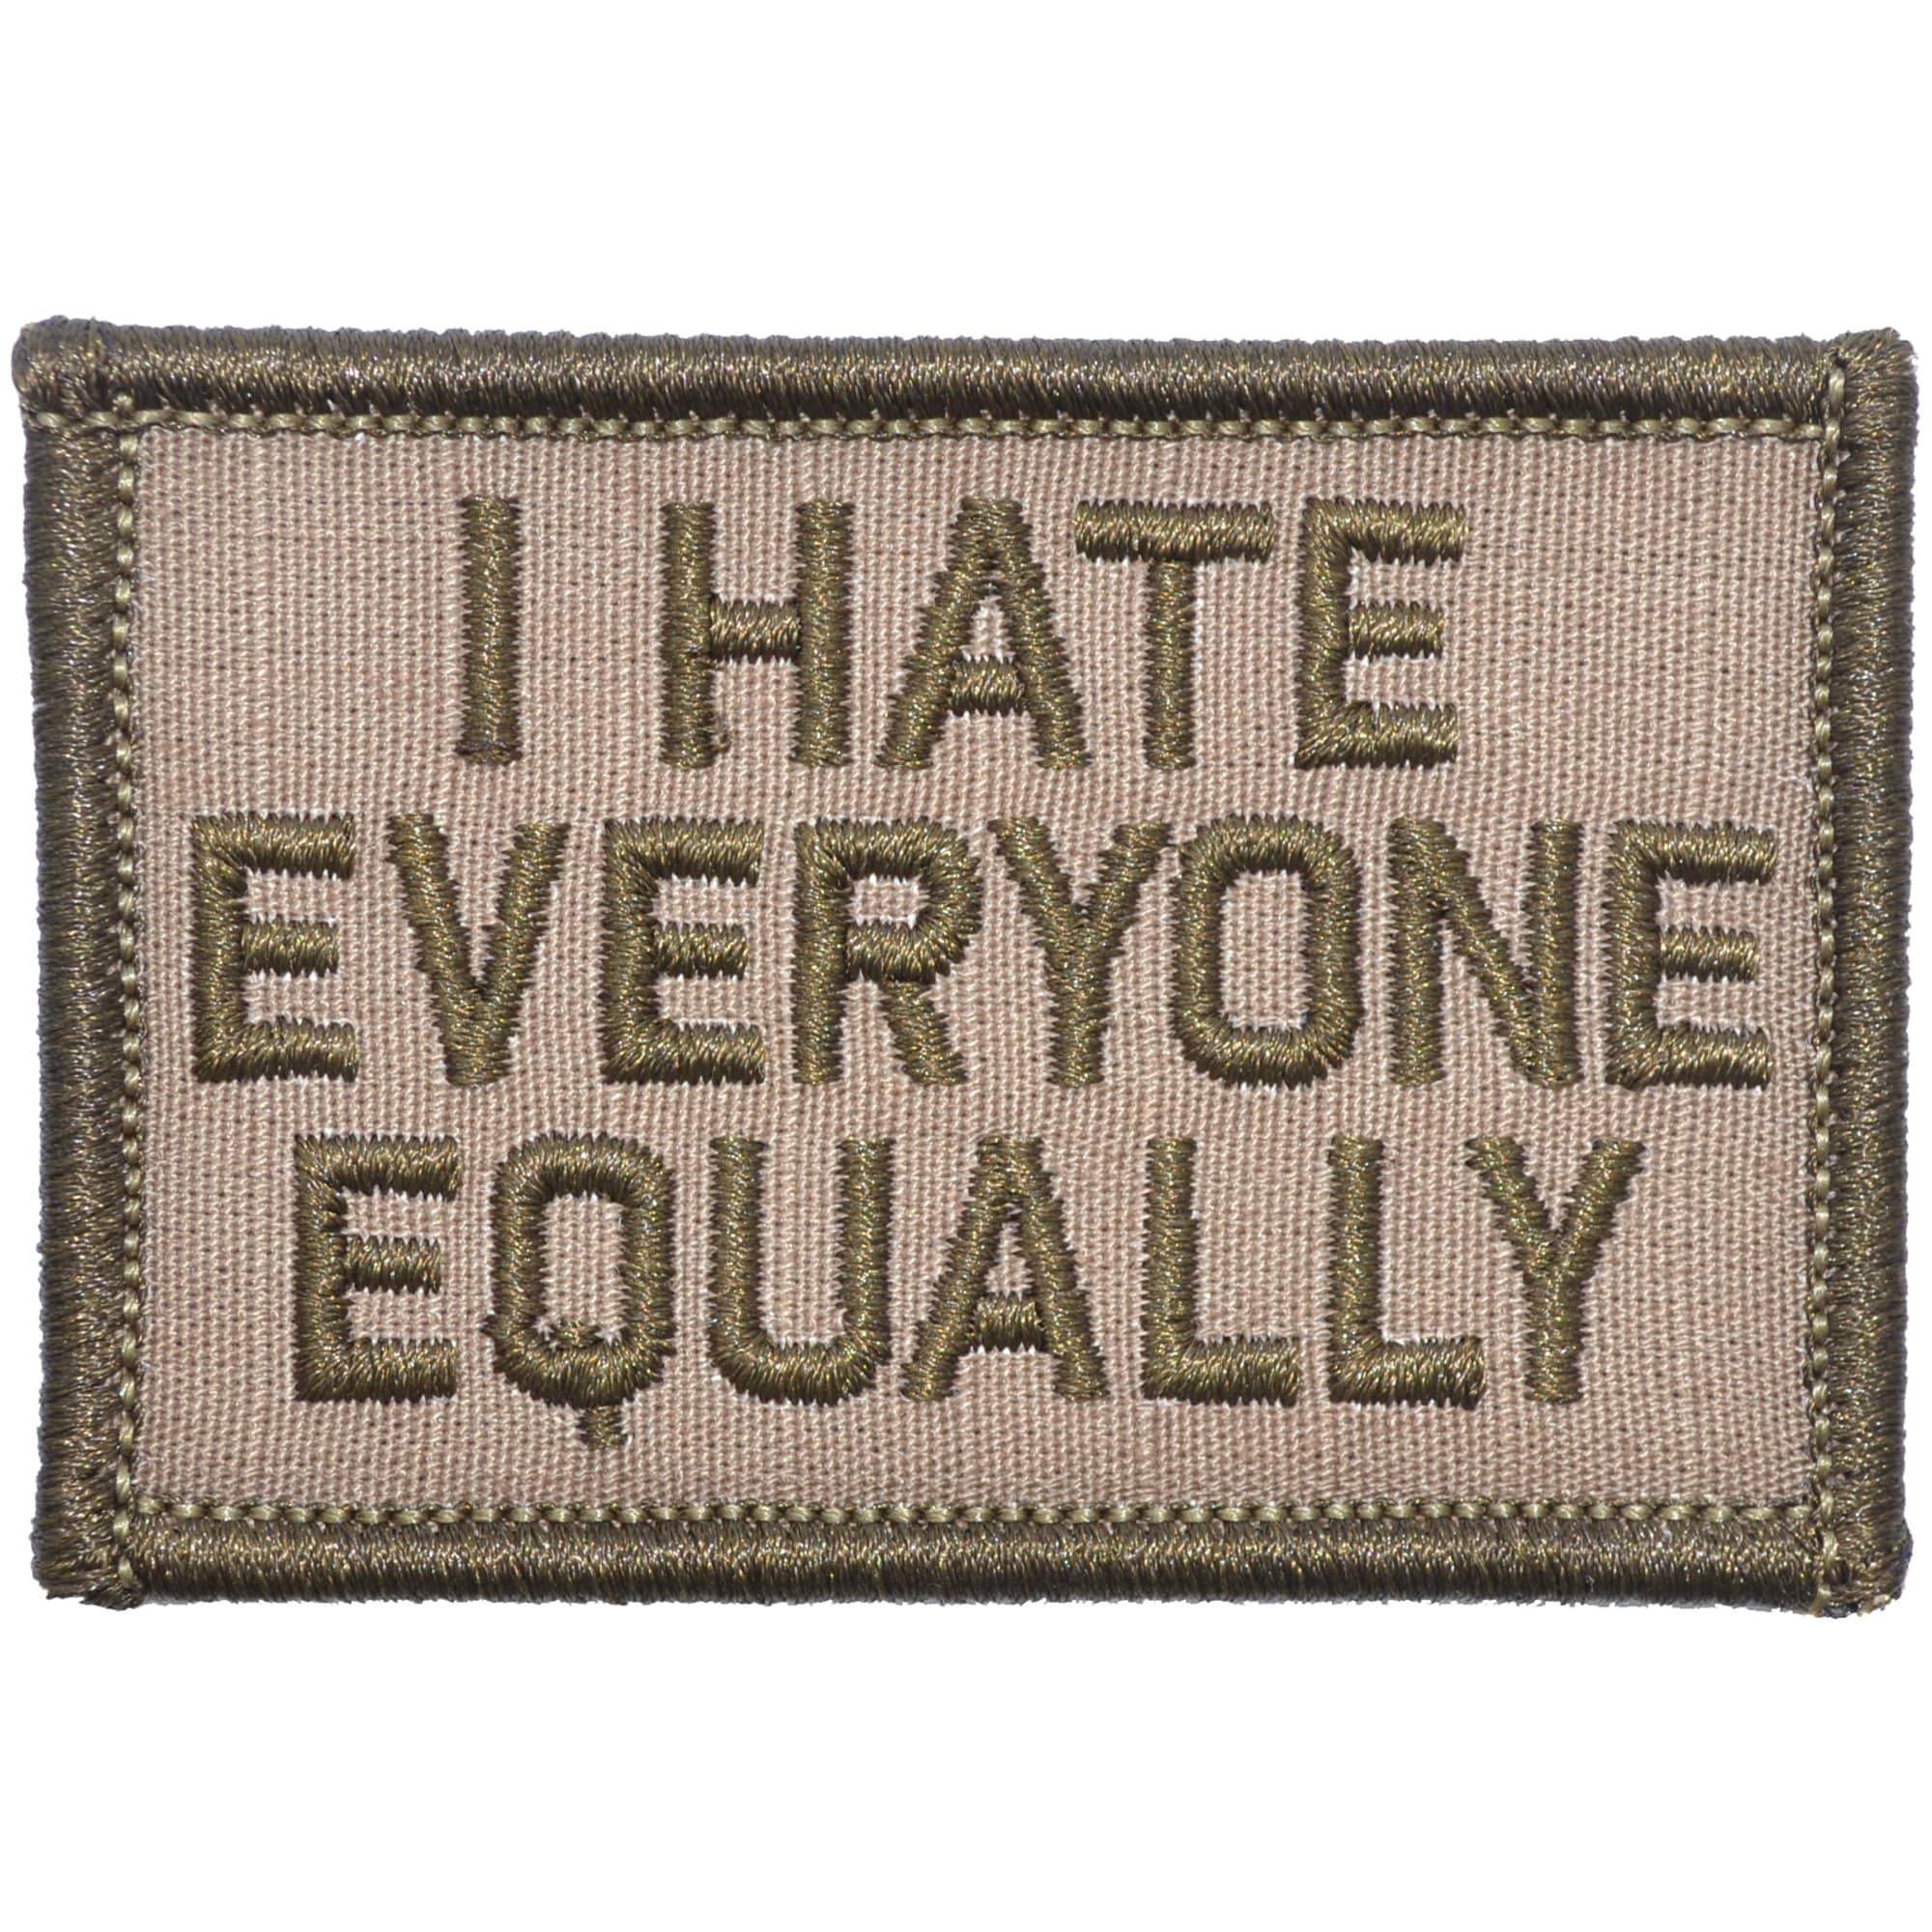 Tactical Gear Junkie Patches Coyote Brown I Hate Everyone Equally - 2x3 Patch